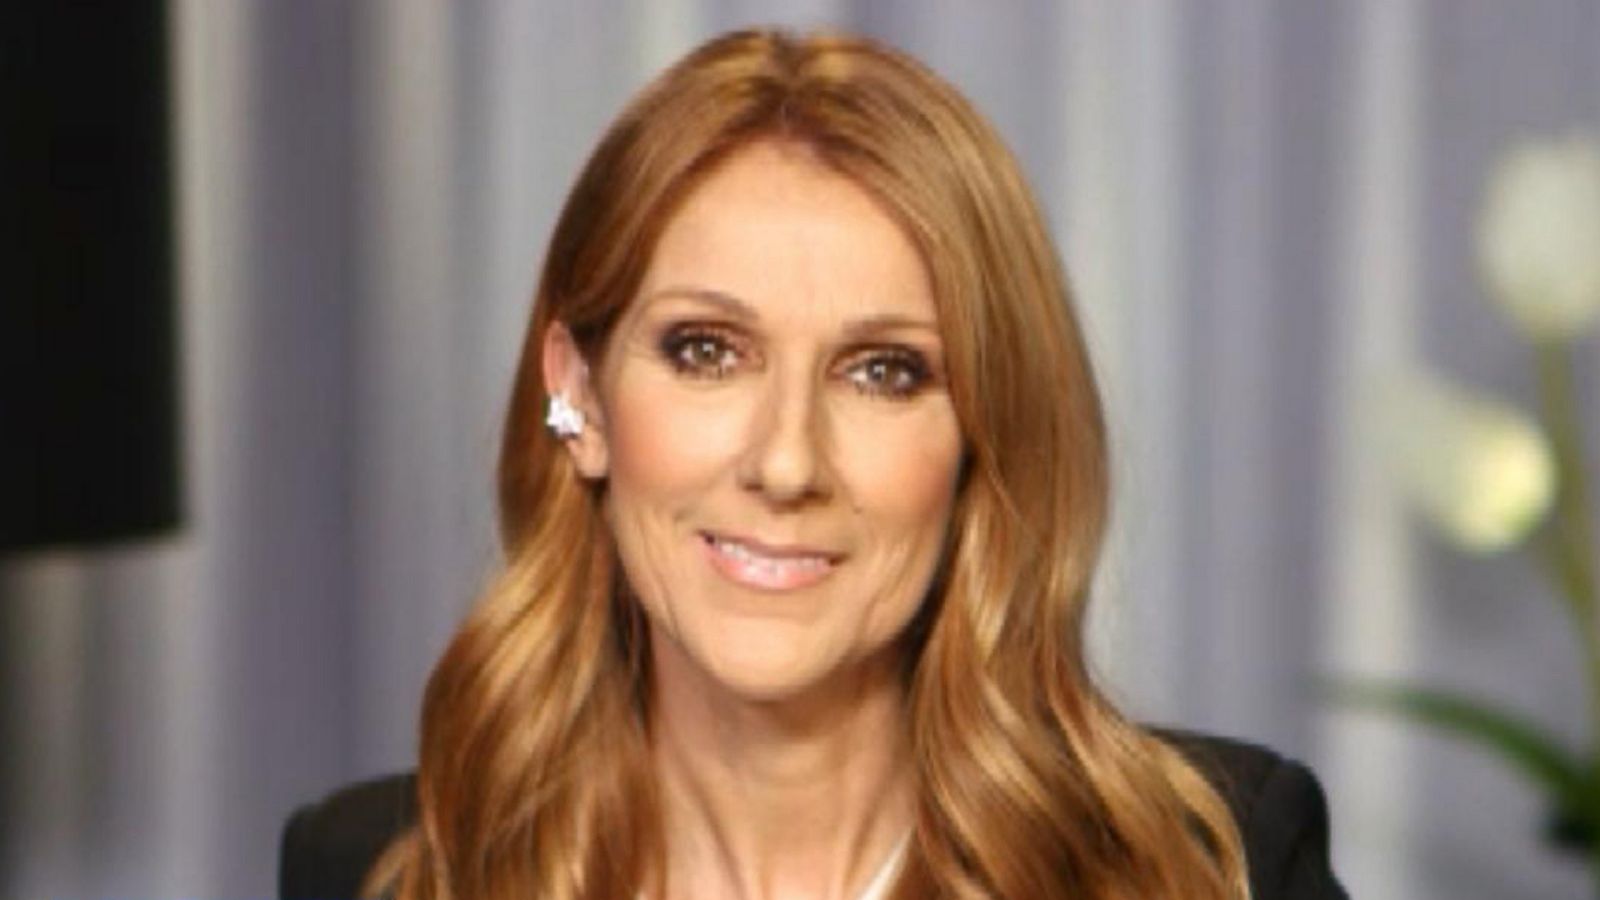 Celine Dion Joins 'GMA' '40 for 40' Live from Las Vegas Good Morning